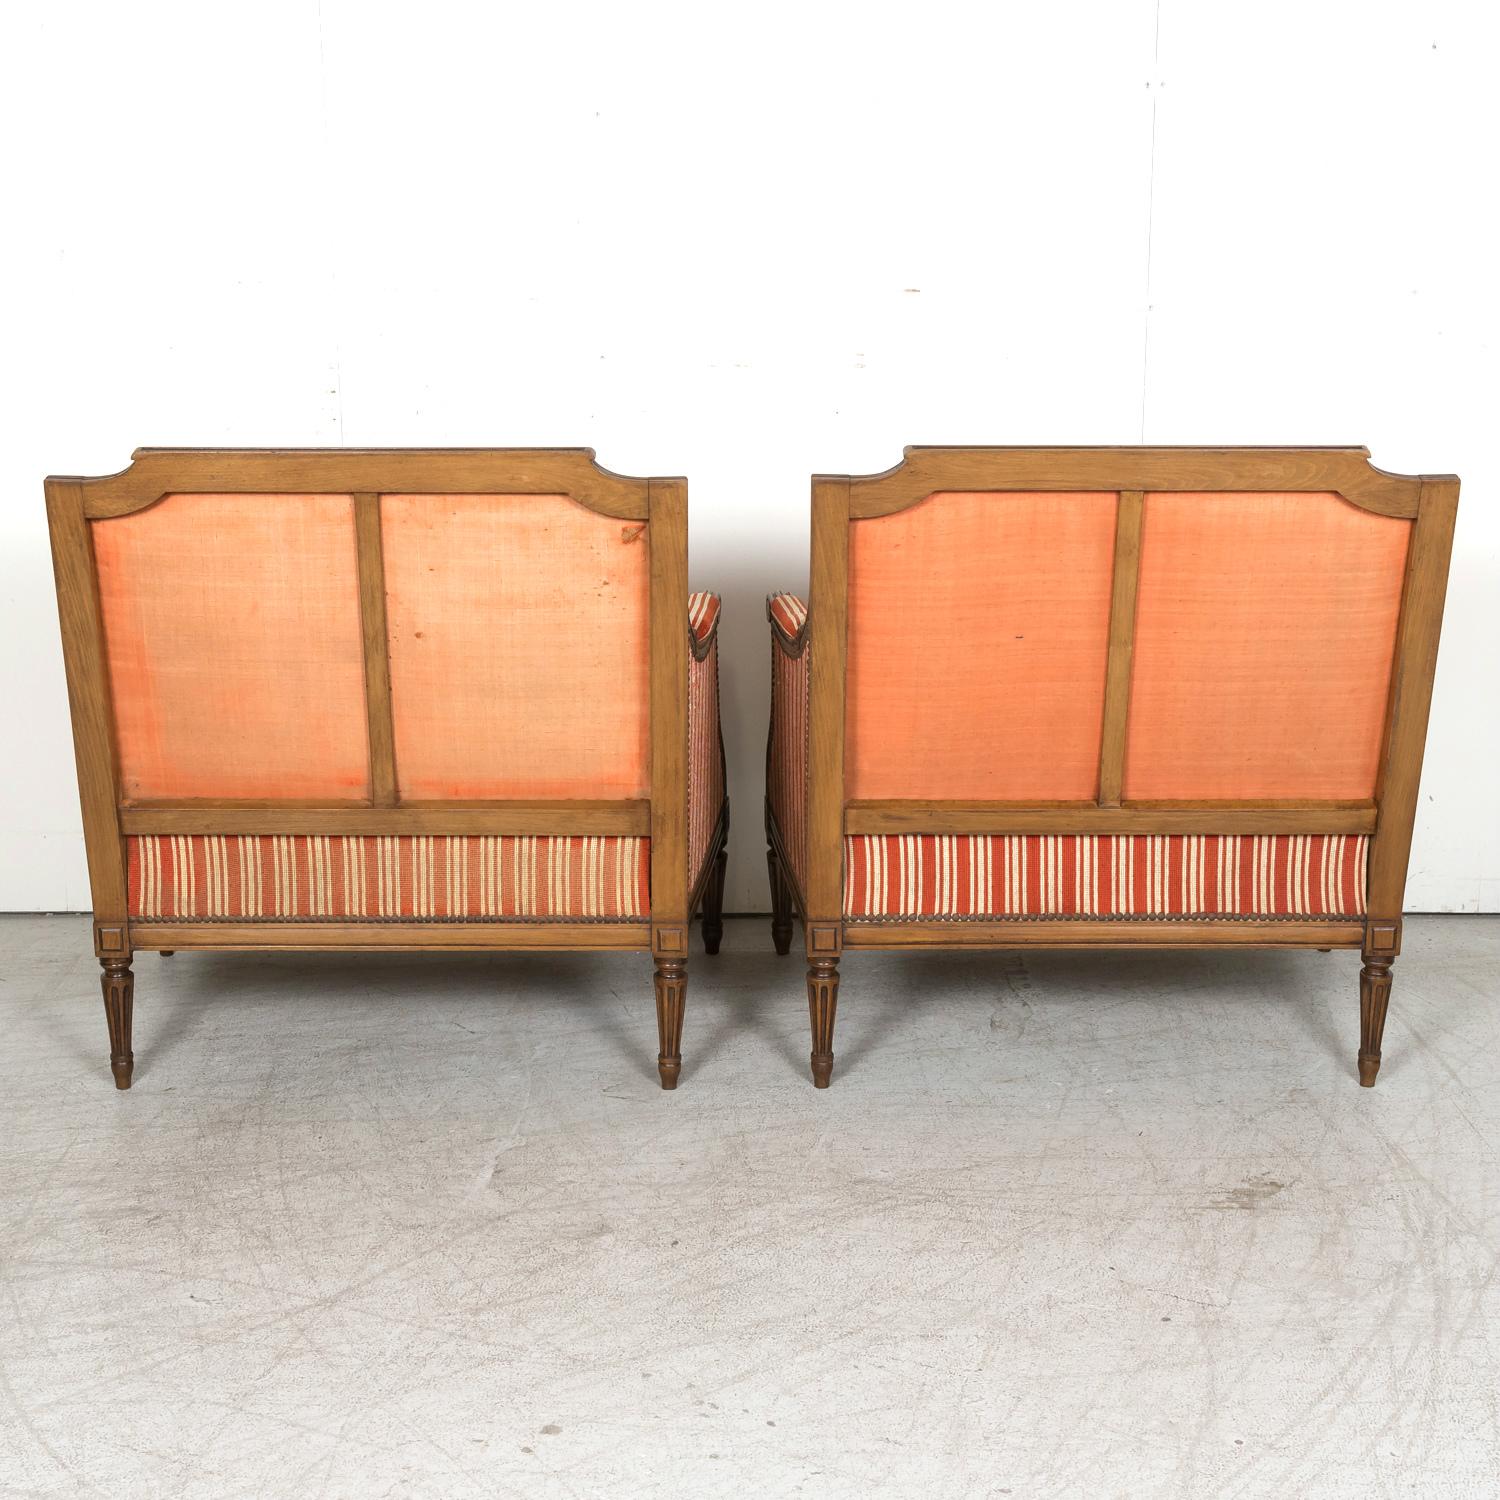 Pair of 19th Century French Louis XVI Style Oversized Bergere Marquise Armchairs For Sale 13